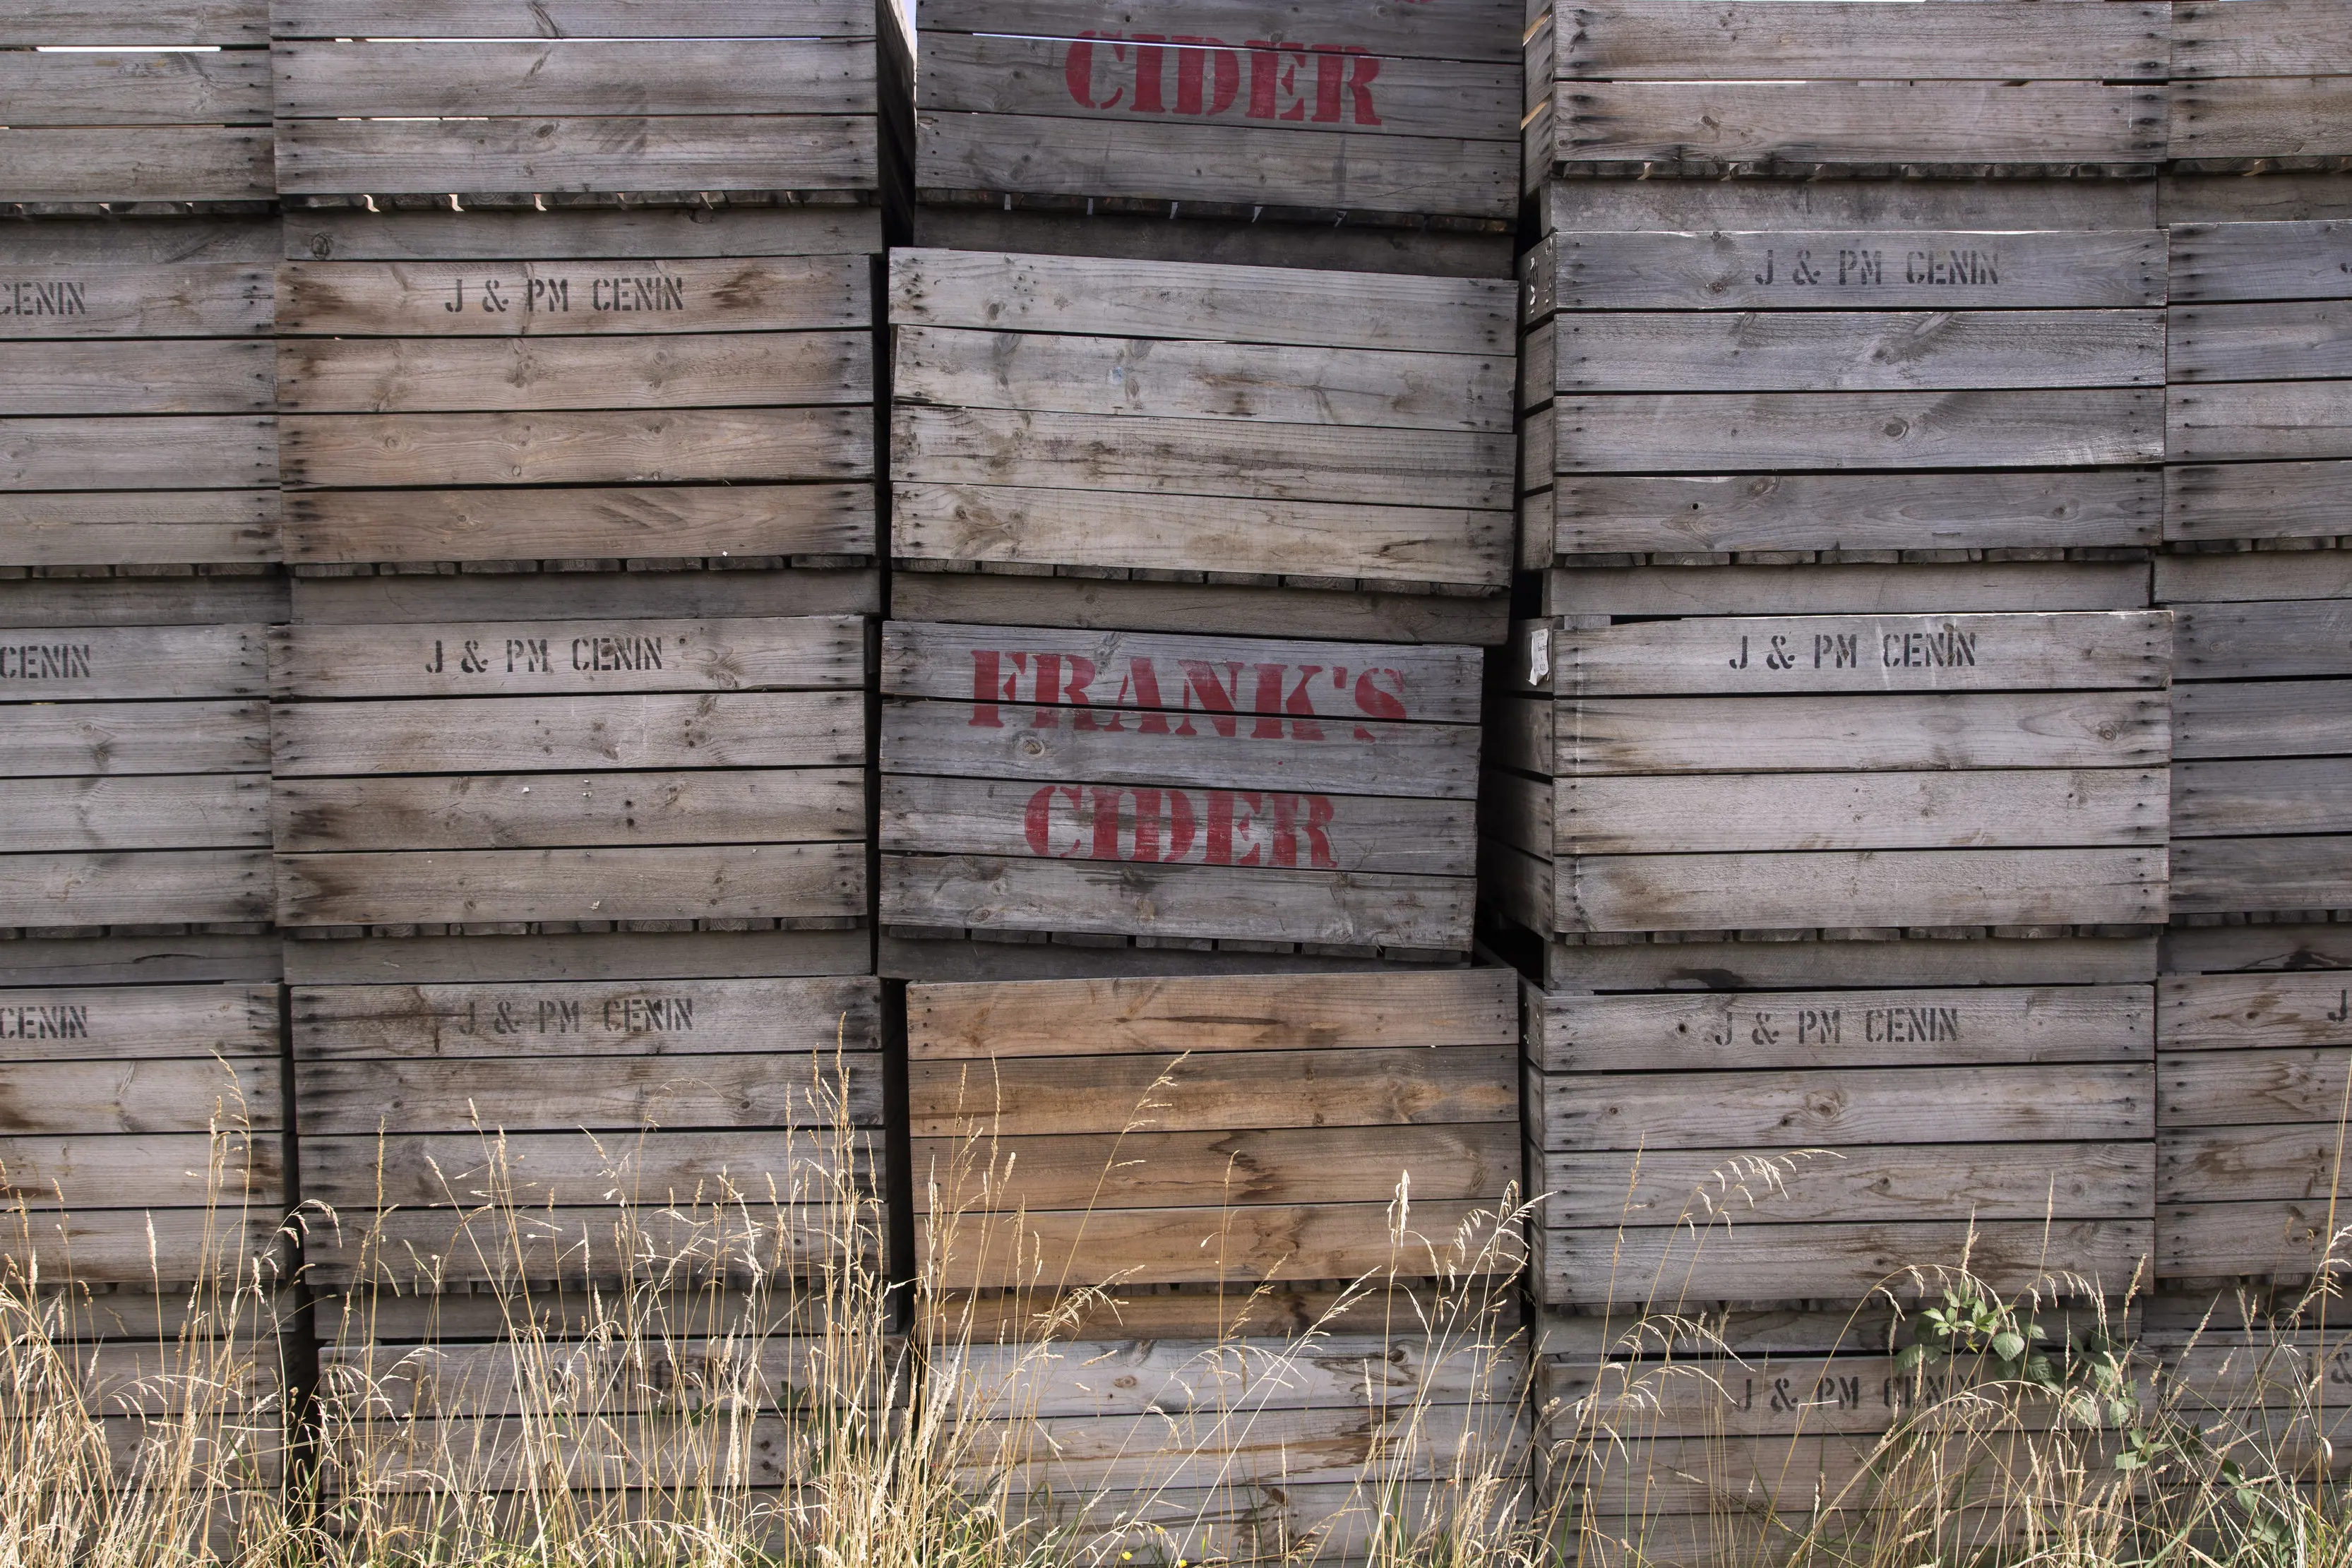 A wall of stacked, wooden, rustic crates, filling up the entire image, with two of the crates having the Frank's Cider logo stamped on.